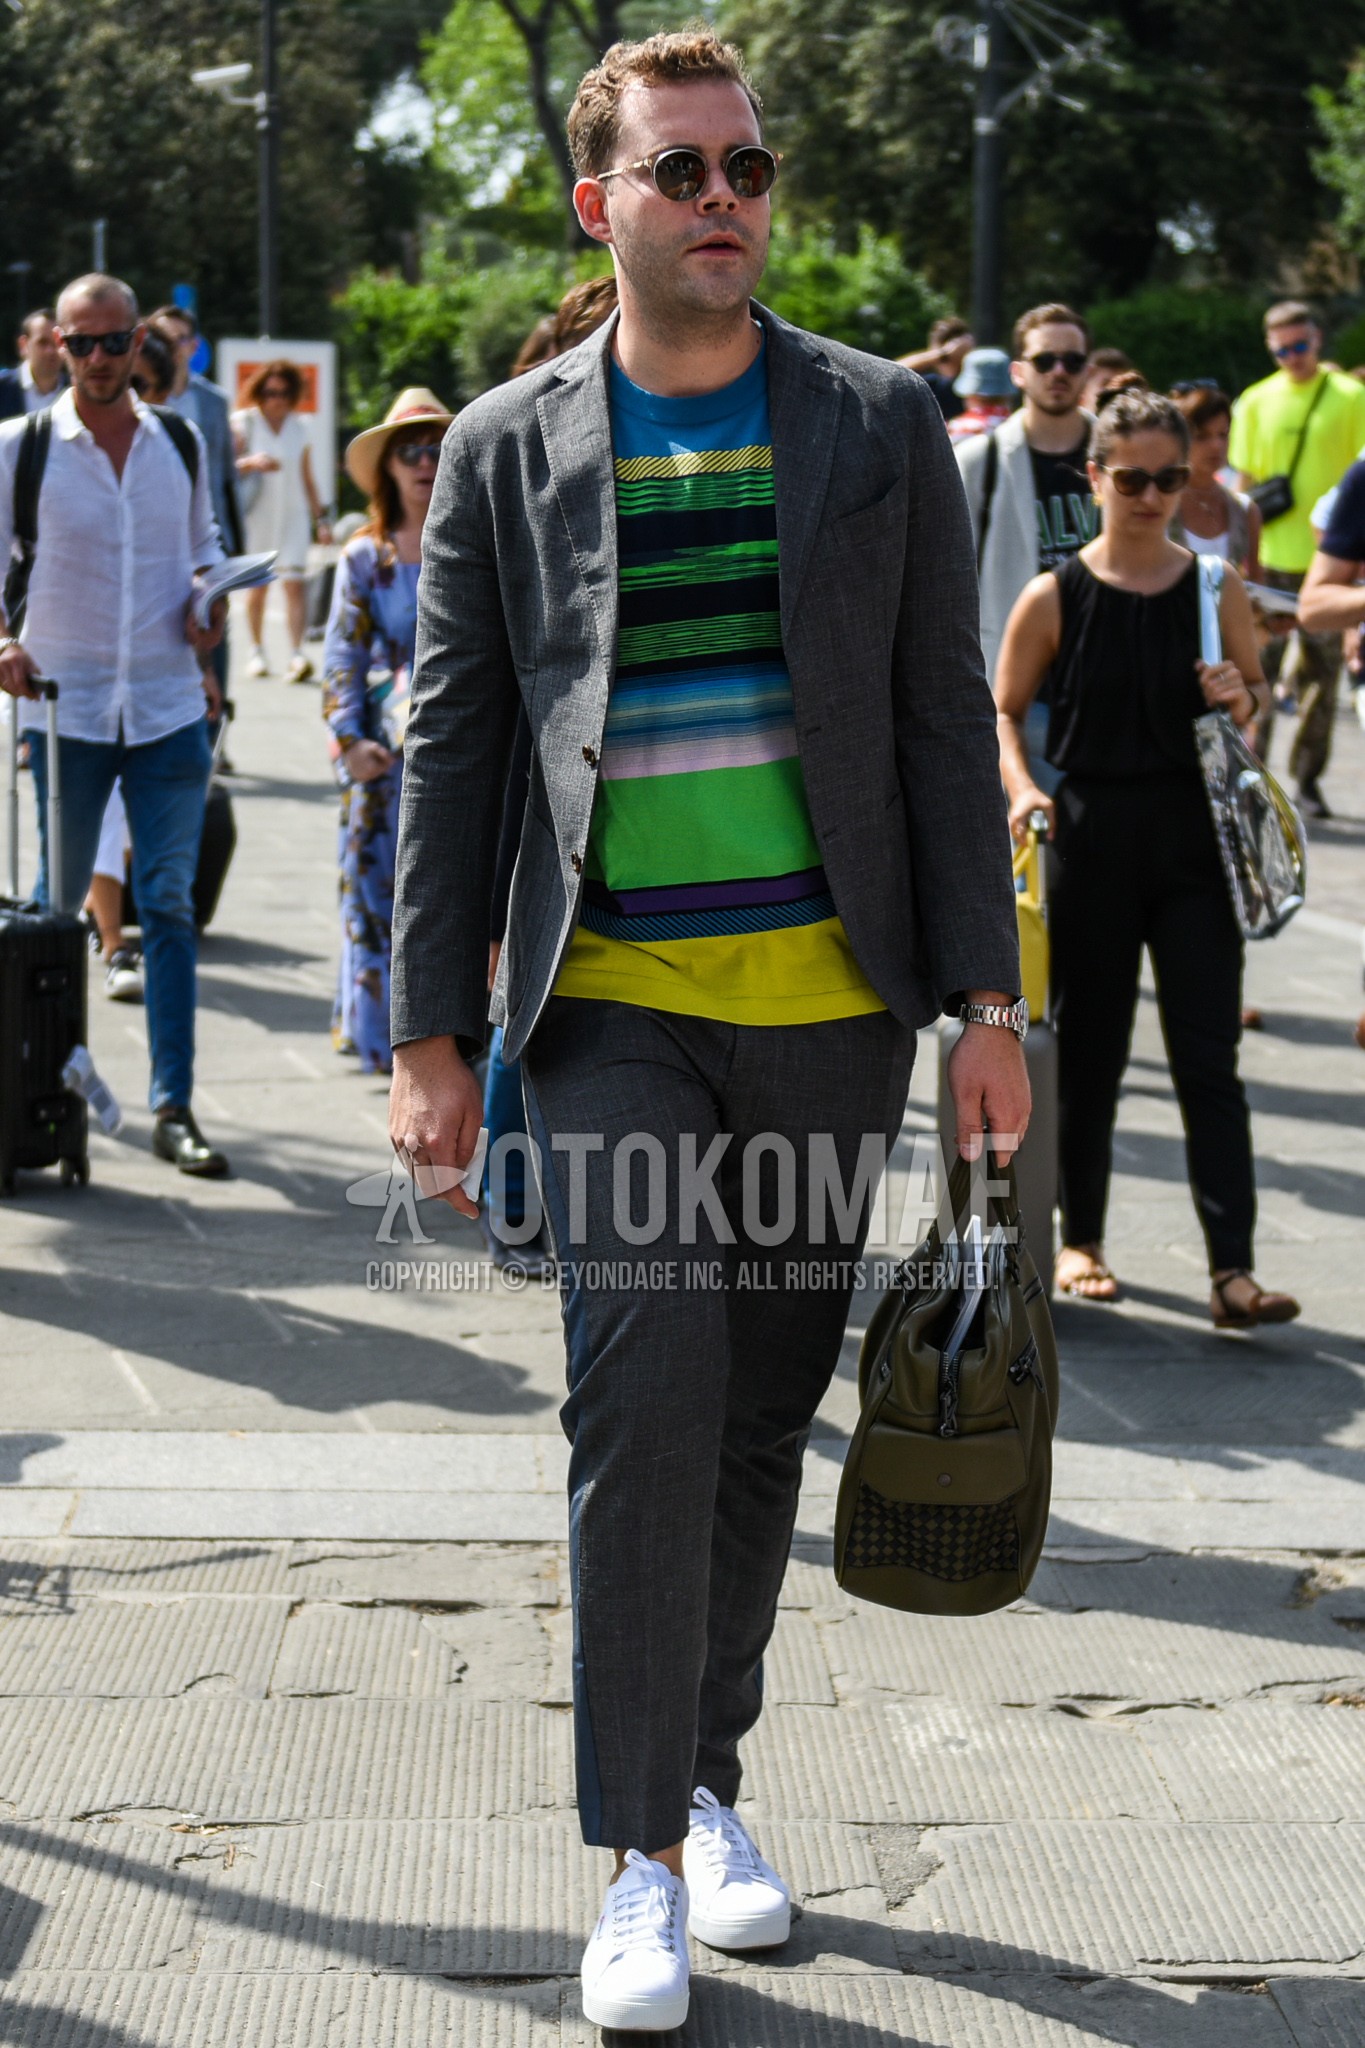 Men's spring summer autumn outfit with clear plain sunglasses, light blue yellow green horizontal stripes t-shirt, white low-cut sneakers, olive green plain briefcase/handbag.